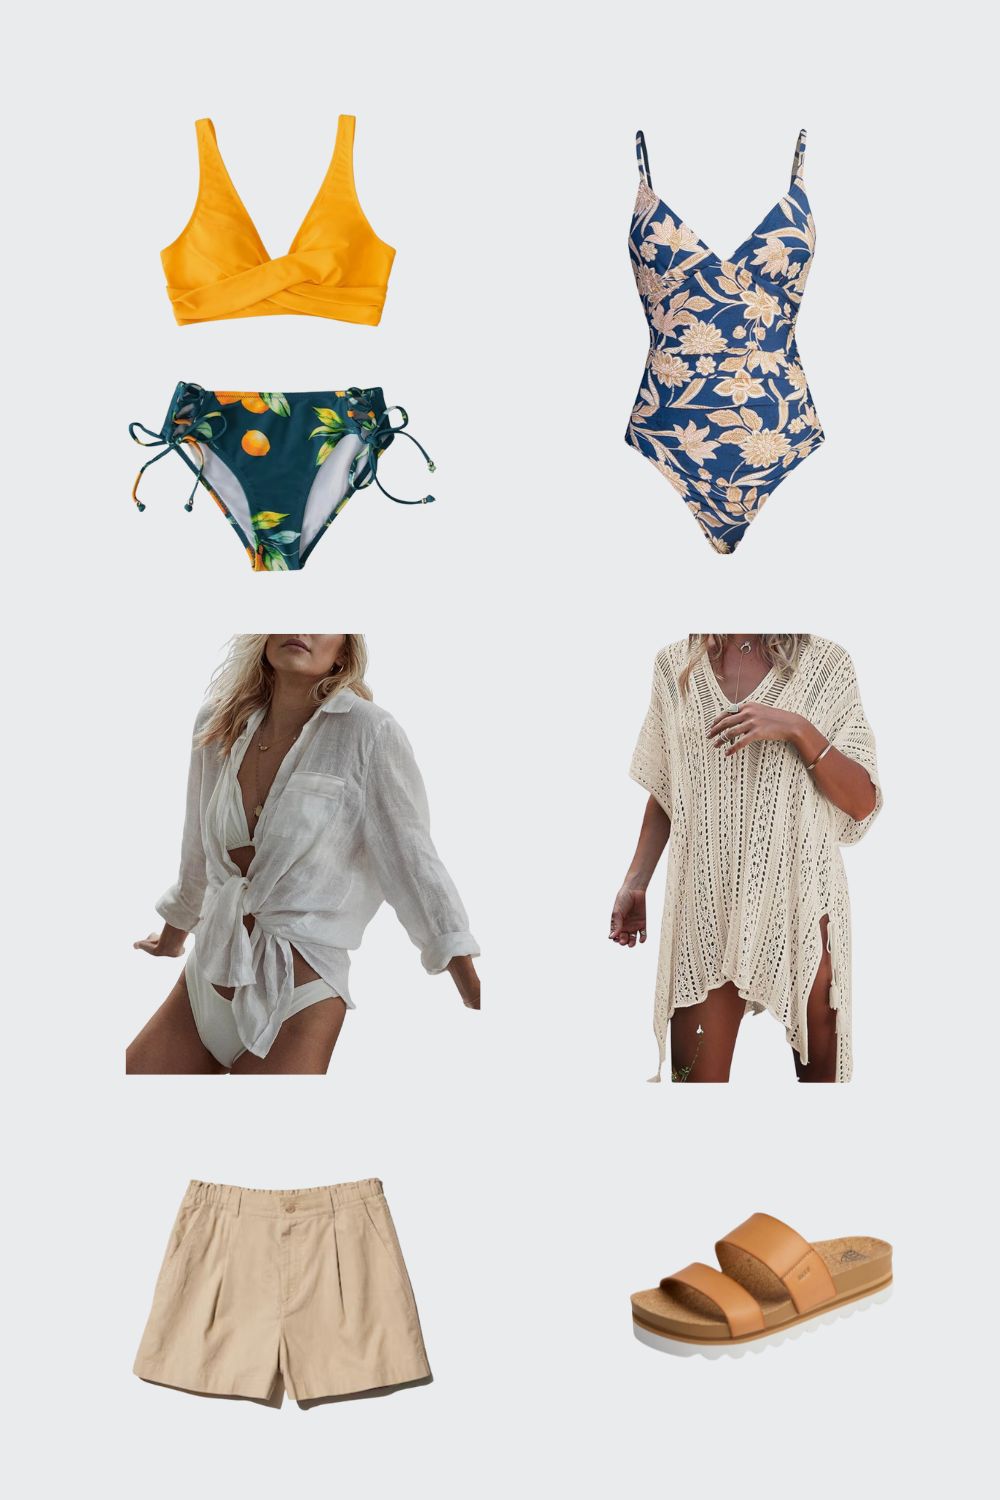 Flatlay collage of women's beach clothing for cruises. Top row: two-piece bikini with yellow top and teal bottoms, navy one-piece swimsuit with beige floral print; Middle row: white button-down, beige crochet beach cover up; Bottom row: beige linen shorts, tan sandals